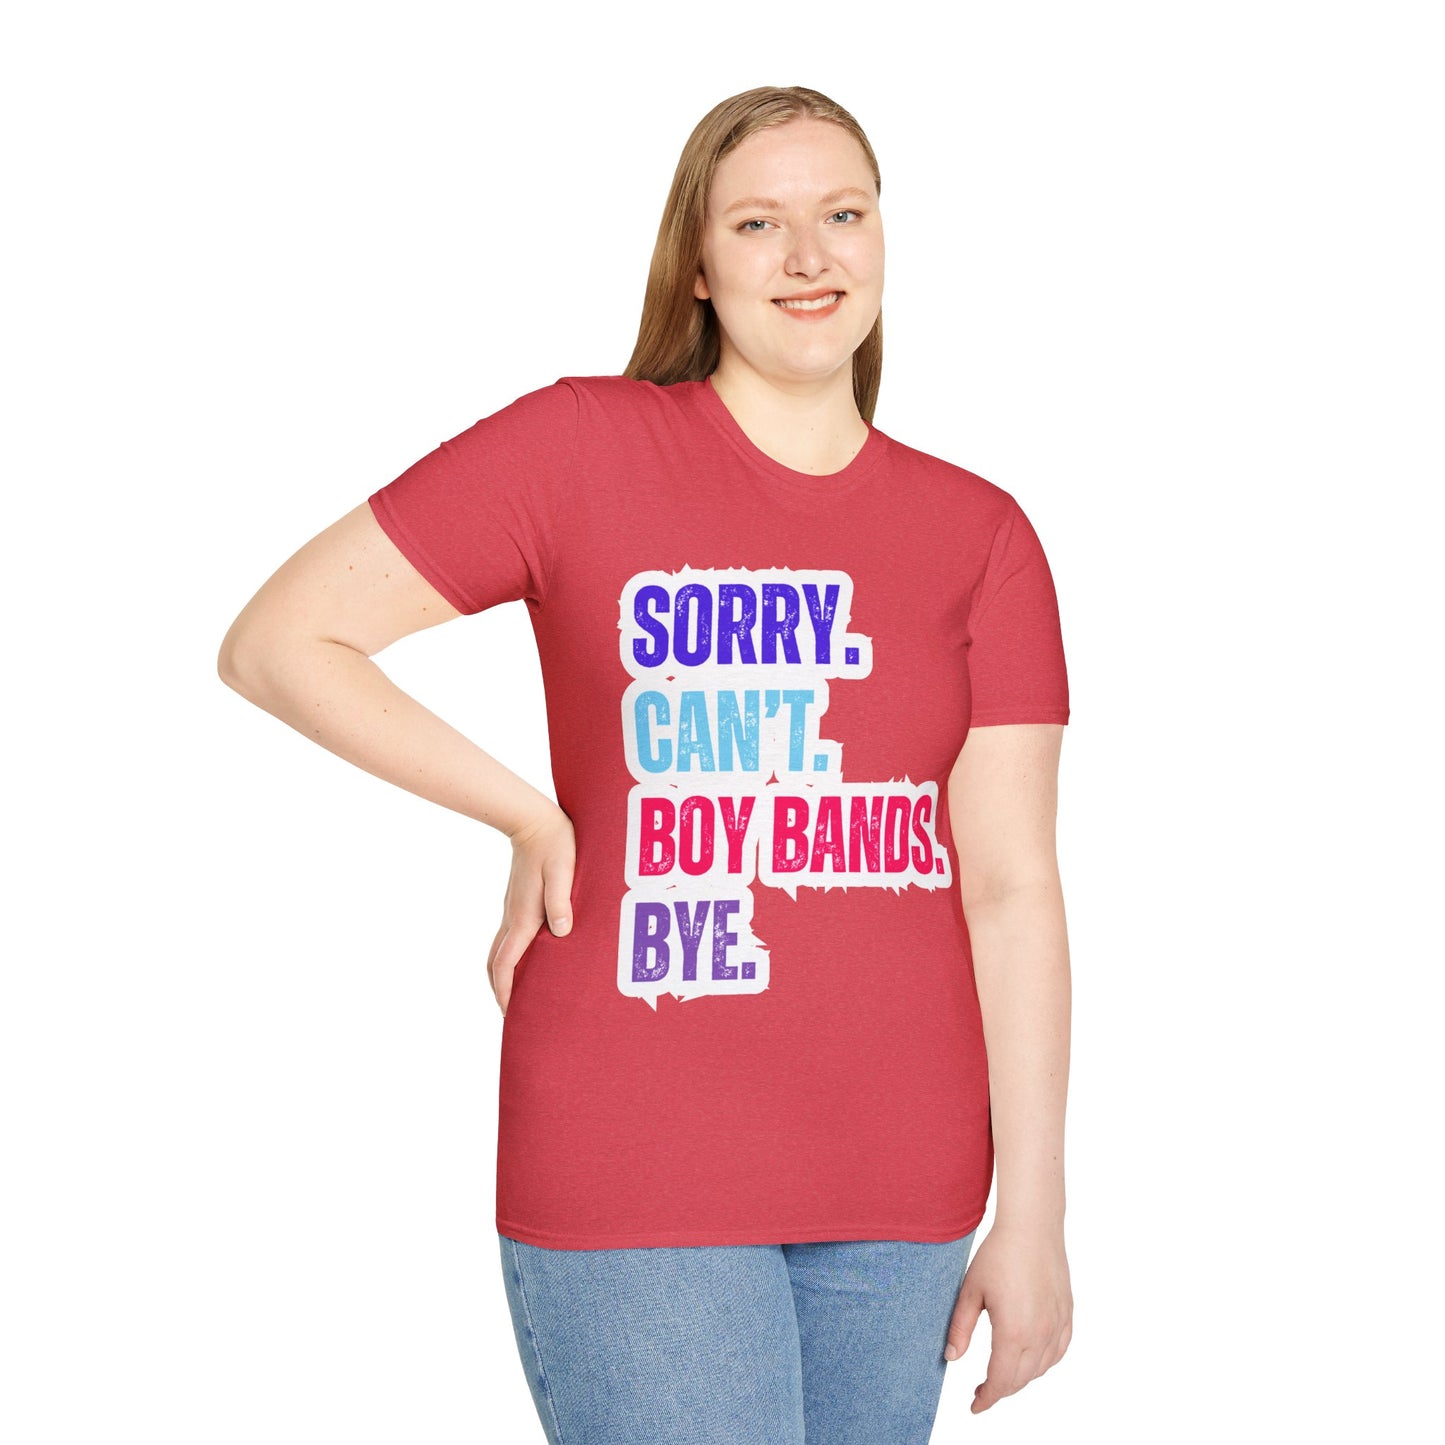 Sorry Can't. Boy Bands. Bye. - Unisex Softstyle T-Shirt